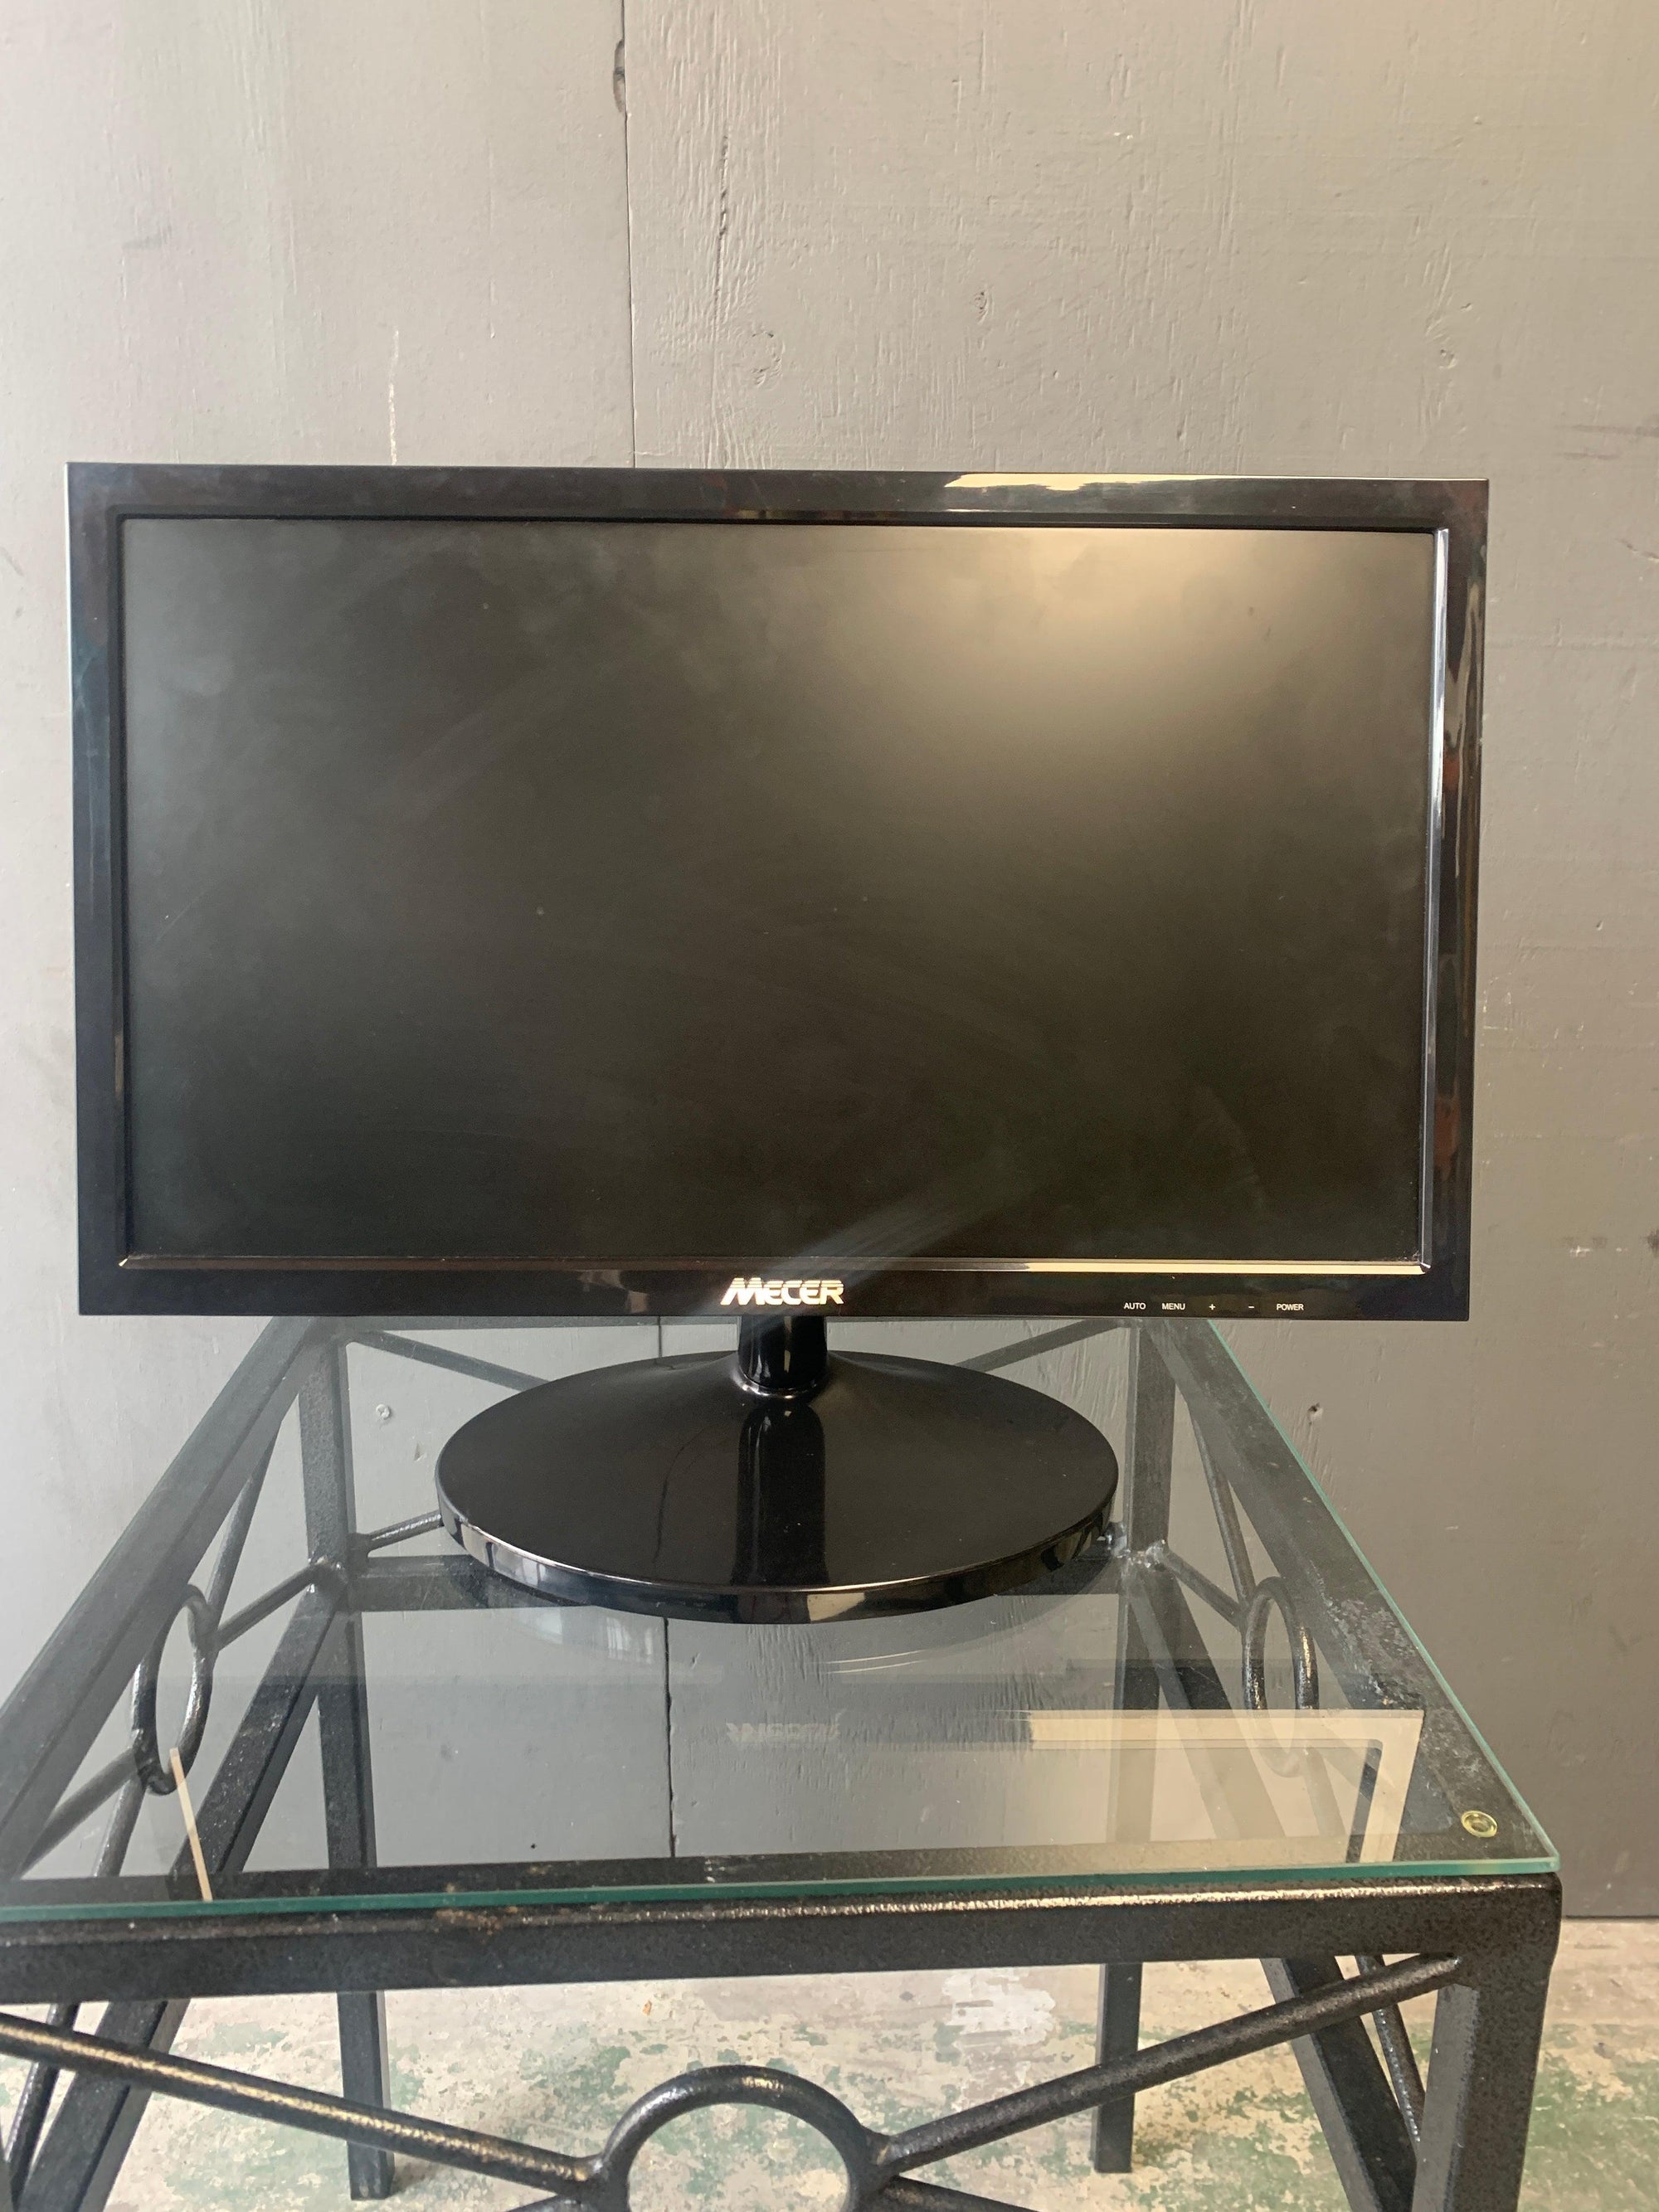 Mecer monitor A1956 19inch -REDUCED